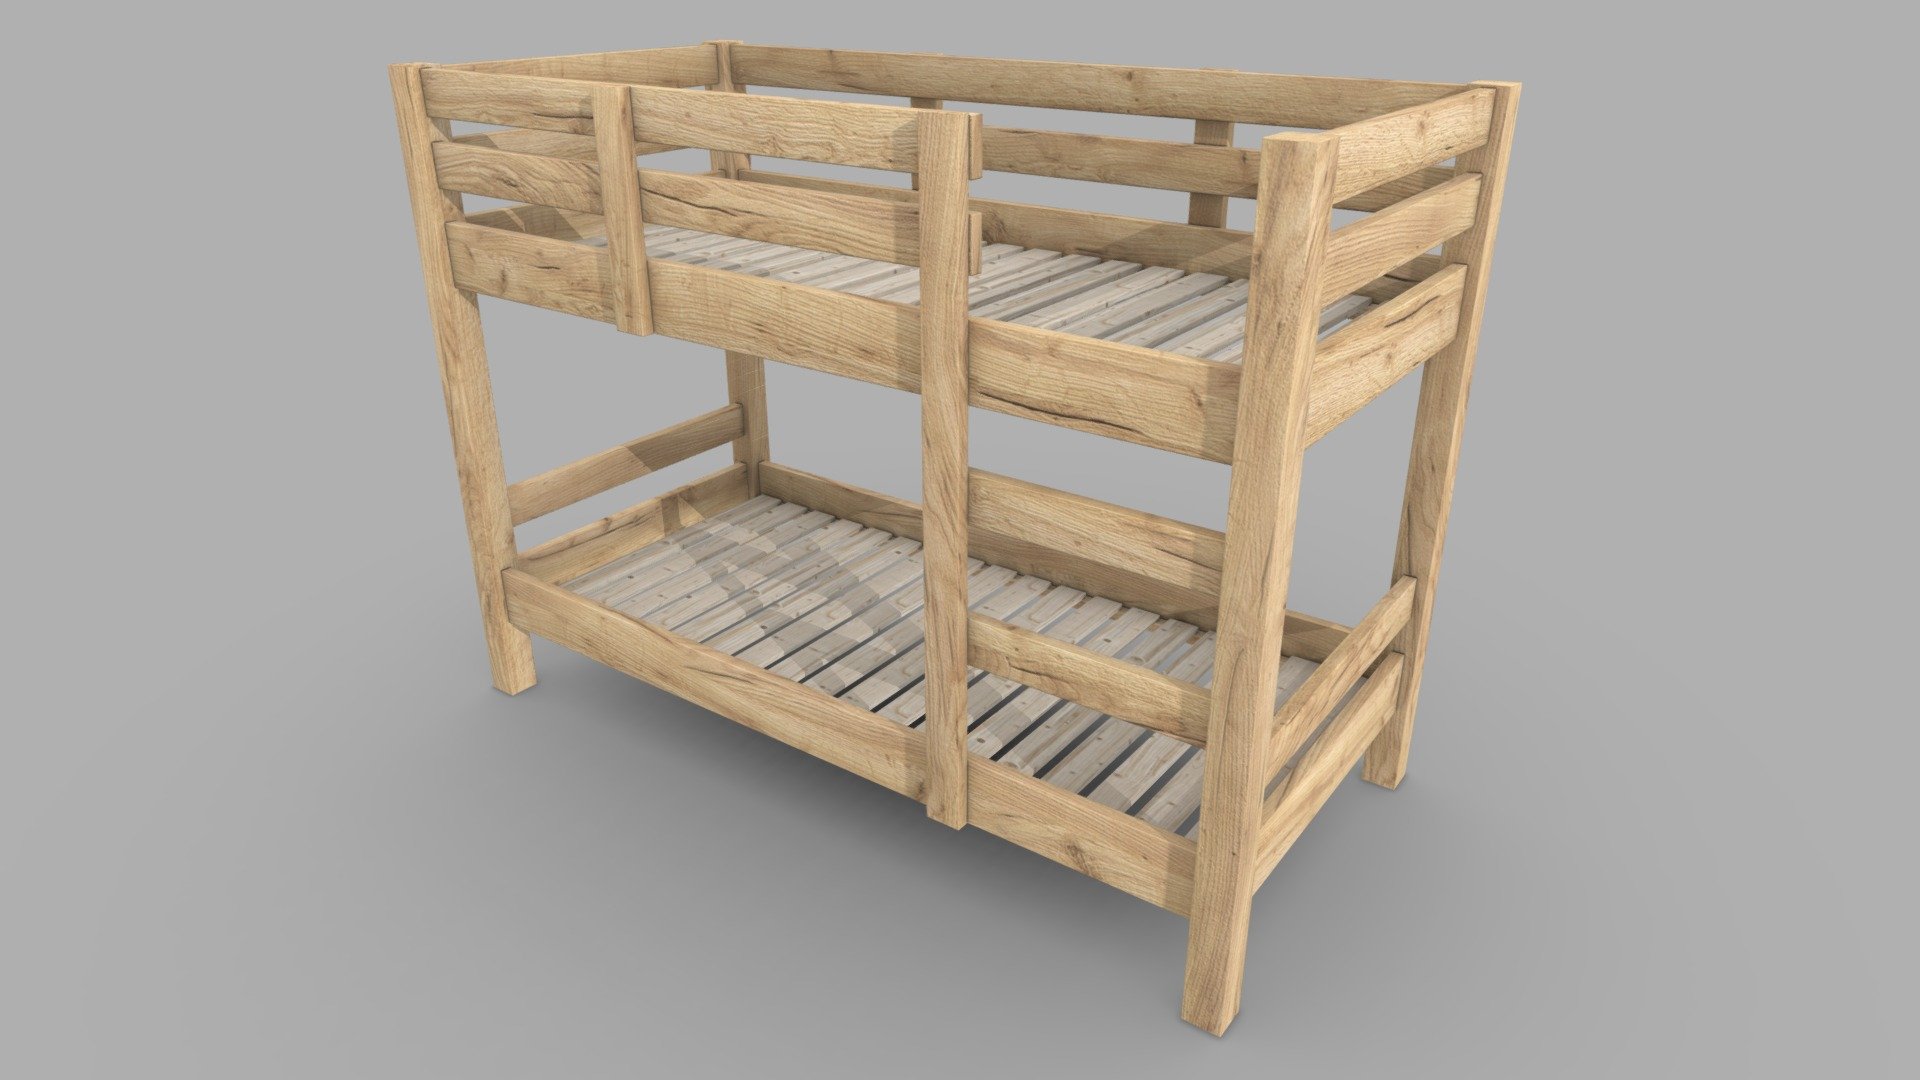 One of the biggest concerns for parents with two kids is how to manage limited space with their growing needs. The Bunk Bed Frame Gold Oak is the perfect solution with 2 beds in just one frame! This bed frame is designed for kids' rooms, and provides an easy way to transition from having one child to two. It's also moveable, so it can be placed in any corner of the room.

It includes the following components:
★ Bunk Bed Frame 1-1 - Gold Oak

★ Scale:
Real world, Metric

★ Size:
102,83cm x 211,604cm x 157cm

★ Sleeping Size
90cm x 200cm

★ File formats:
FBX Version 2019

★ UVW Texture coordinates:
UVW Unwrapped

★ Pivot:
At the Bottom Center of the Model

★ Textures:
Diffuse, Normal

★ Texture Resolution:
4k = 4096px x 4096px

★ Animations
None - Bunk Bed Frame 1-1 - Gold Oak - Buy Royalty Free 3D model by OctoMan 3d model